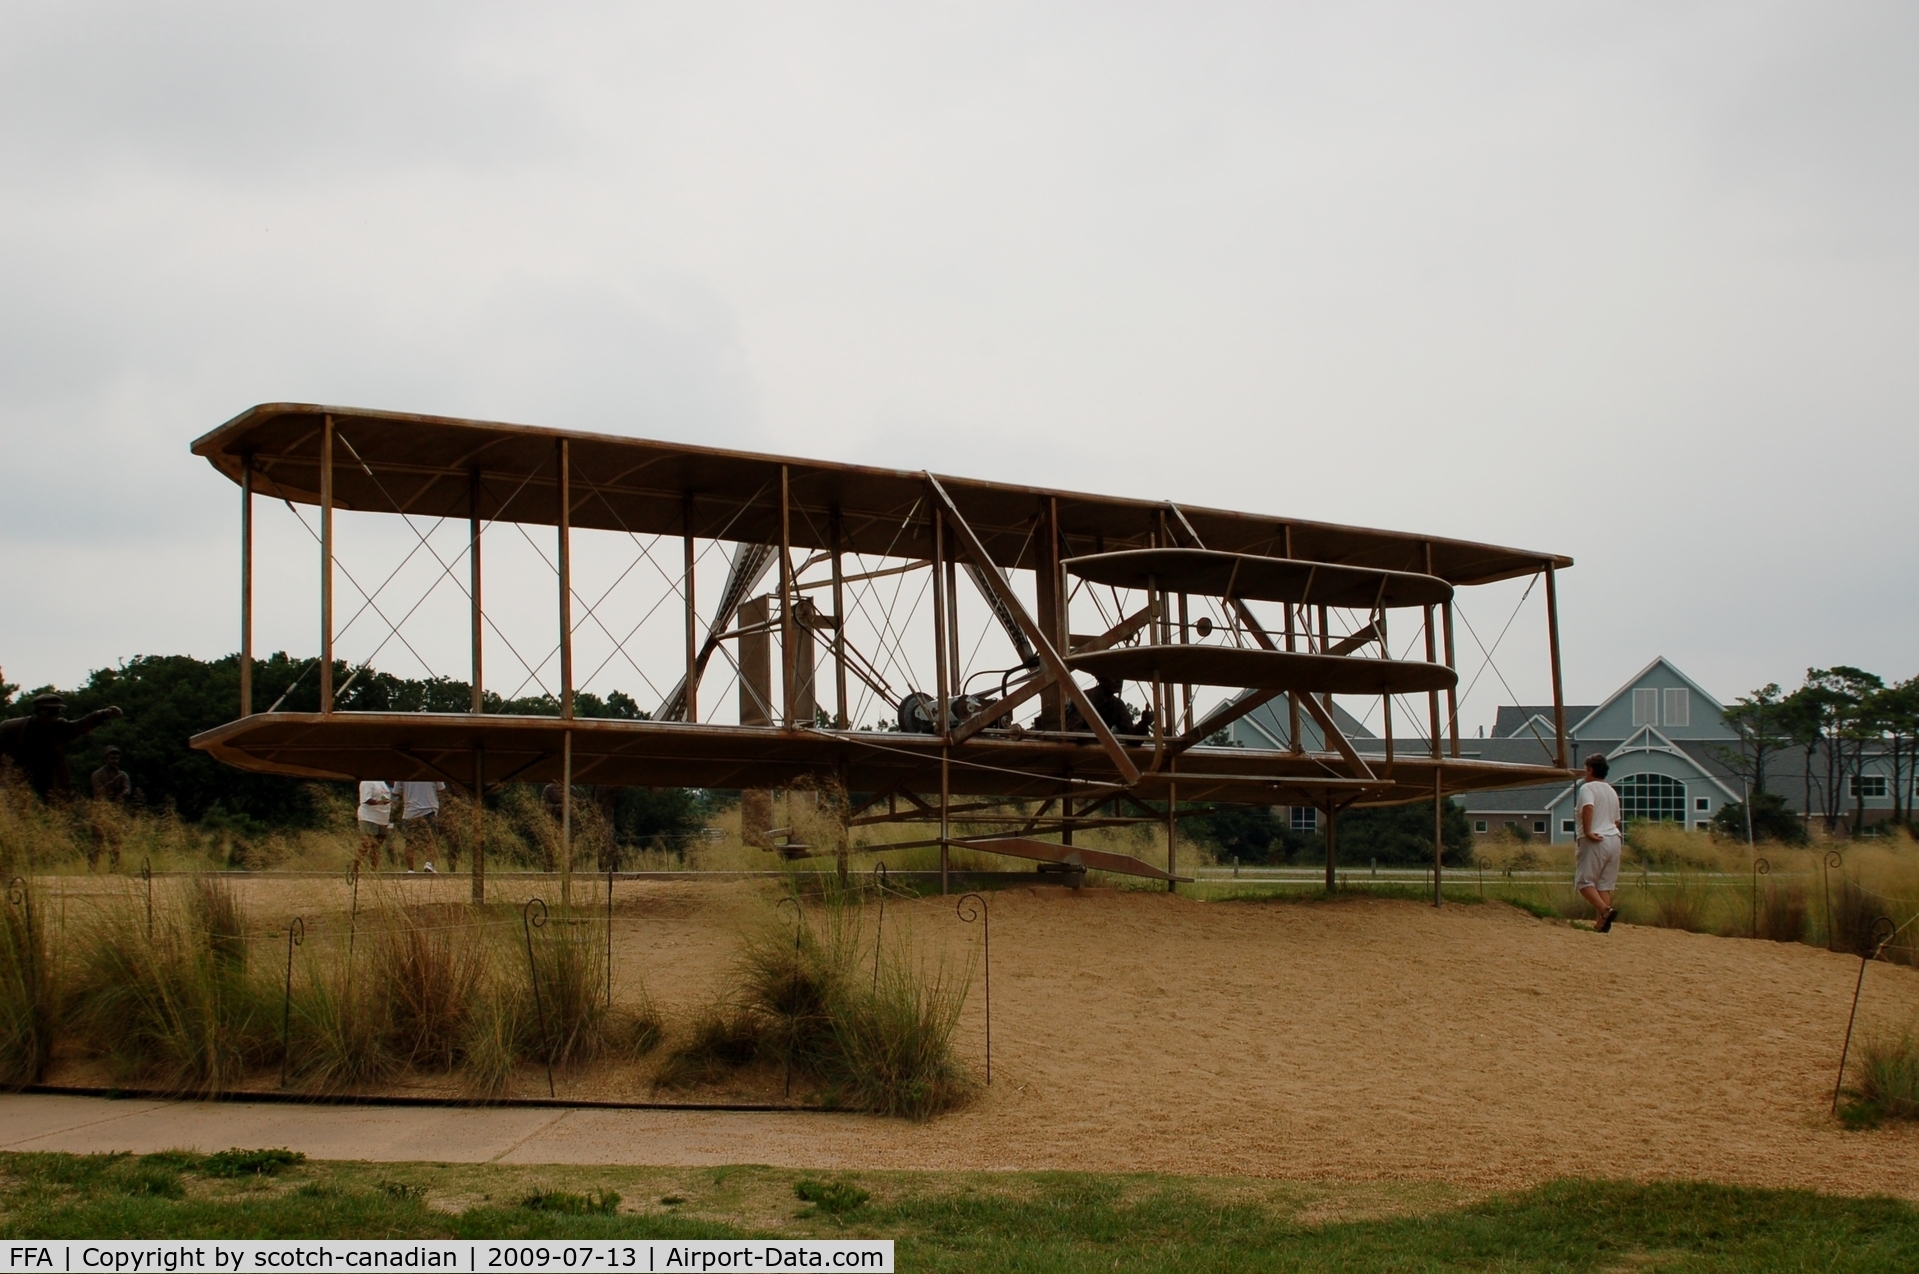 First Flight Airport (FFA) - 1903 Wright Flyer Sculpture at the Wright Brothers National Memorial, Kill Devil Hills, NC